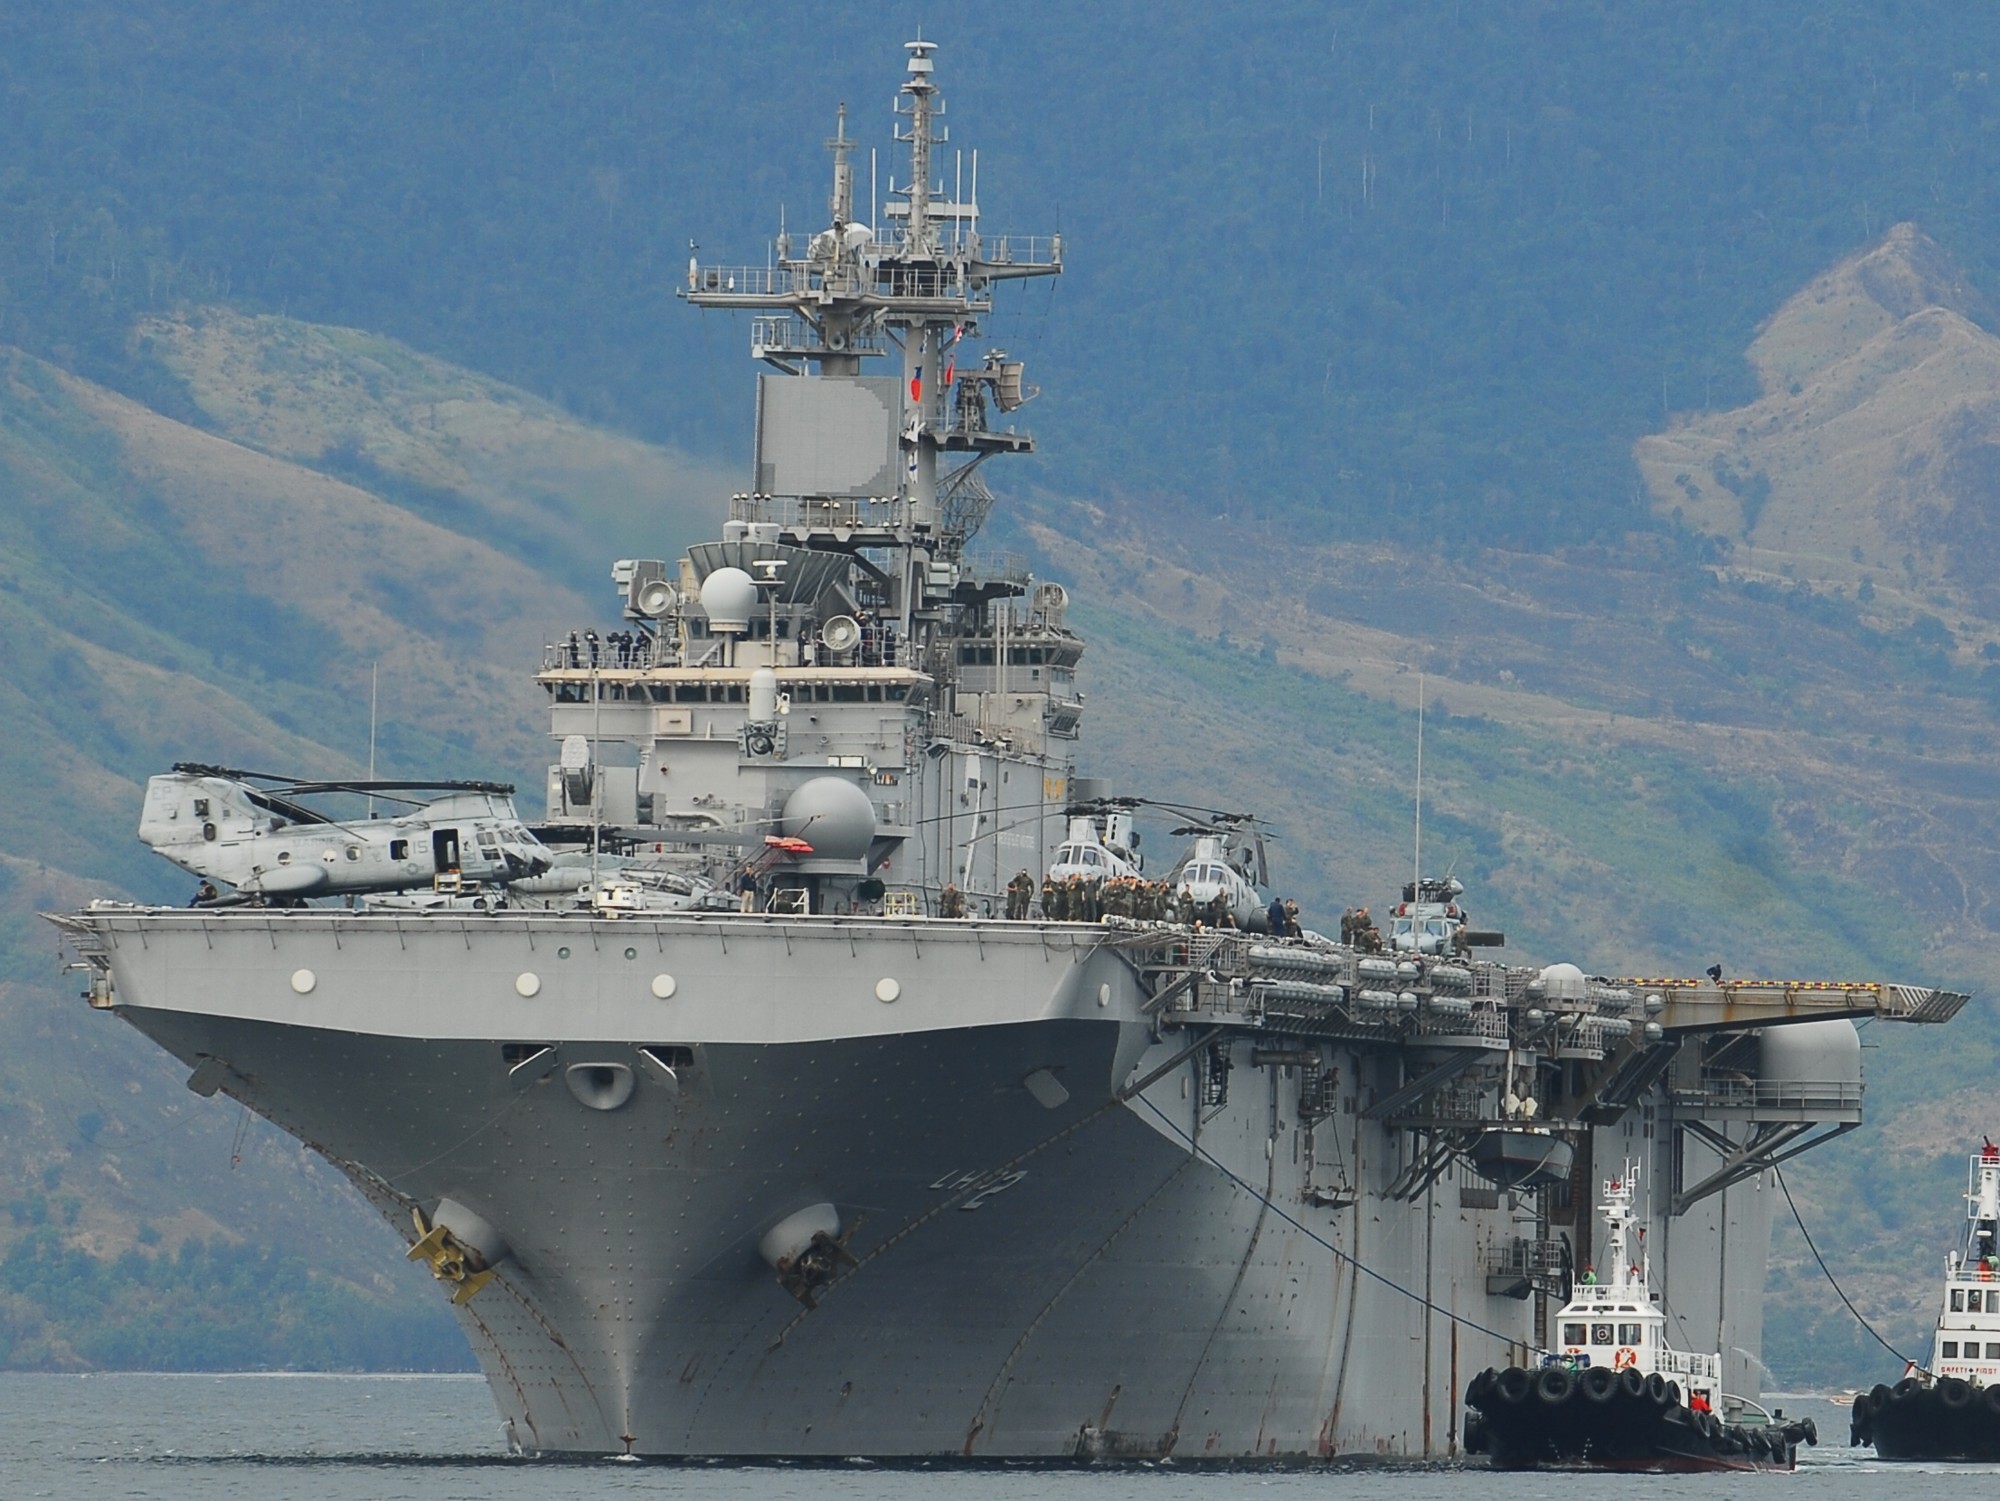 lhd-2 uss essex wasp class amphibious assault ship landing helicopter us navy marines hmm-265 subic bay philippines 54